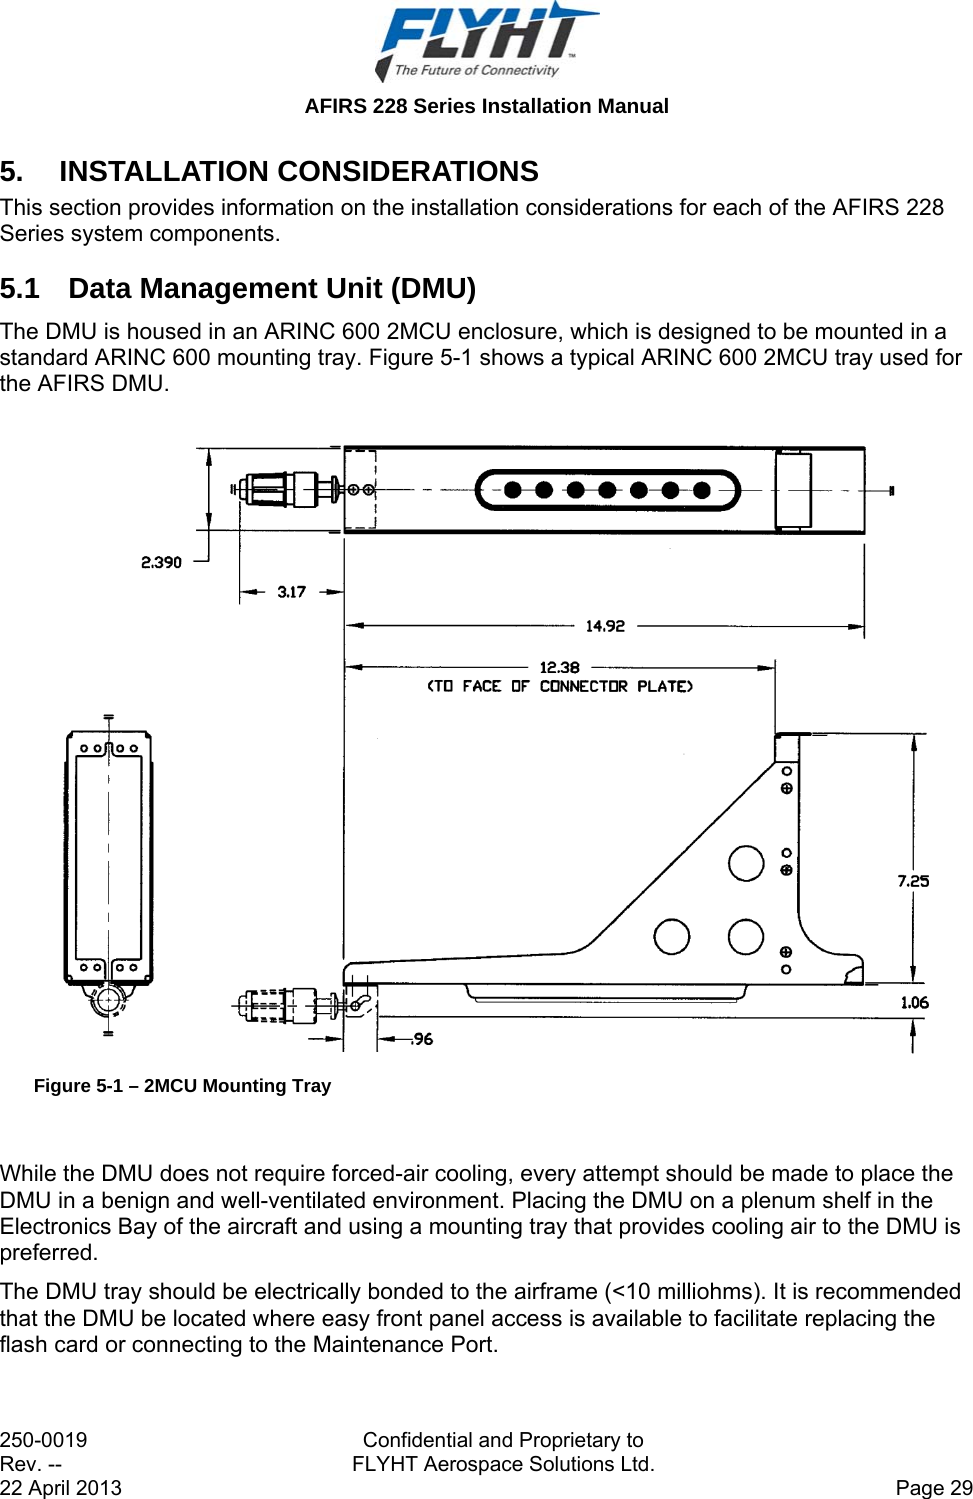  AFIRS 228 Series Installation Manual 250-0019  Confidential and Proprietary to Rev. --  FLYHT Aerospace Solutions Ltd. 22 April 2013    Page 29 5. INSTALLATION CONSIDERATIONS This section provides information on the installation considerations for each of the AFIRS 228 Series system components. 5.1  Data Management Unit (DMU) The DMU is housed in an ARINC 600 2MCU enclosure, which is designed to be mounted in a standard ARINC 600 mounting tray. Figure 5-1 shows a typical ARINC 600 2MCU tray used for the AFIRS DMU.  Figure 5-1 – 2MCU Mounting Tray  While the DMU does not require forced-air cooling, every attempt should be made to place the DMU in a benign and well-ventilated environment. Placing the DMU on a plenum shelf in the Electronics Bay of the aircraft and using a mounting tray that provides cooling air to the DMU is preferred. The DMU tray should be electrically bonded to the airframe (&lt;10 milliohms). It is recommended that the DMU be located where easy front panel access is available to facilitate replacing the flash card or connecting to the Maintenance Port.  